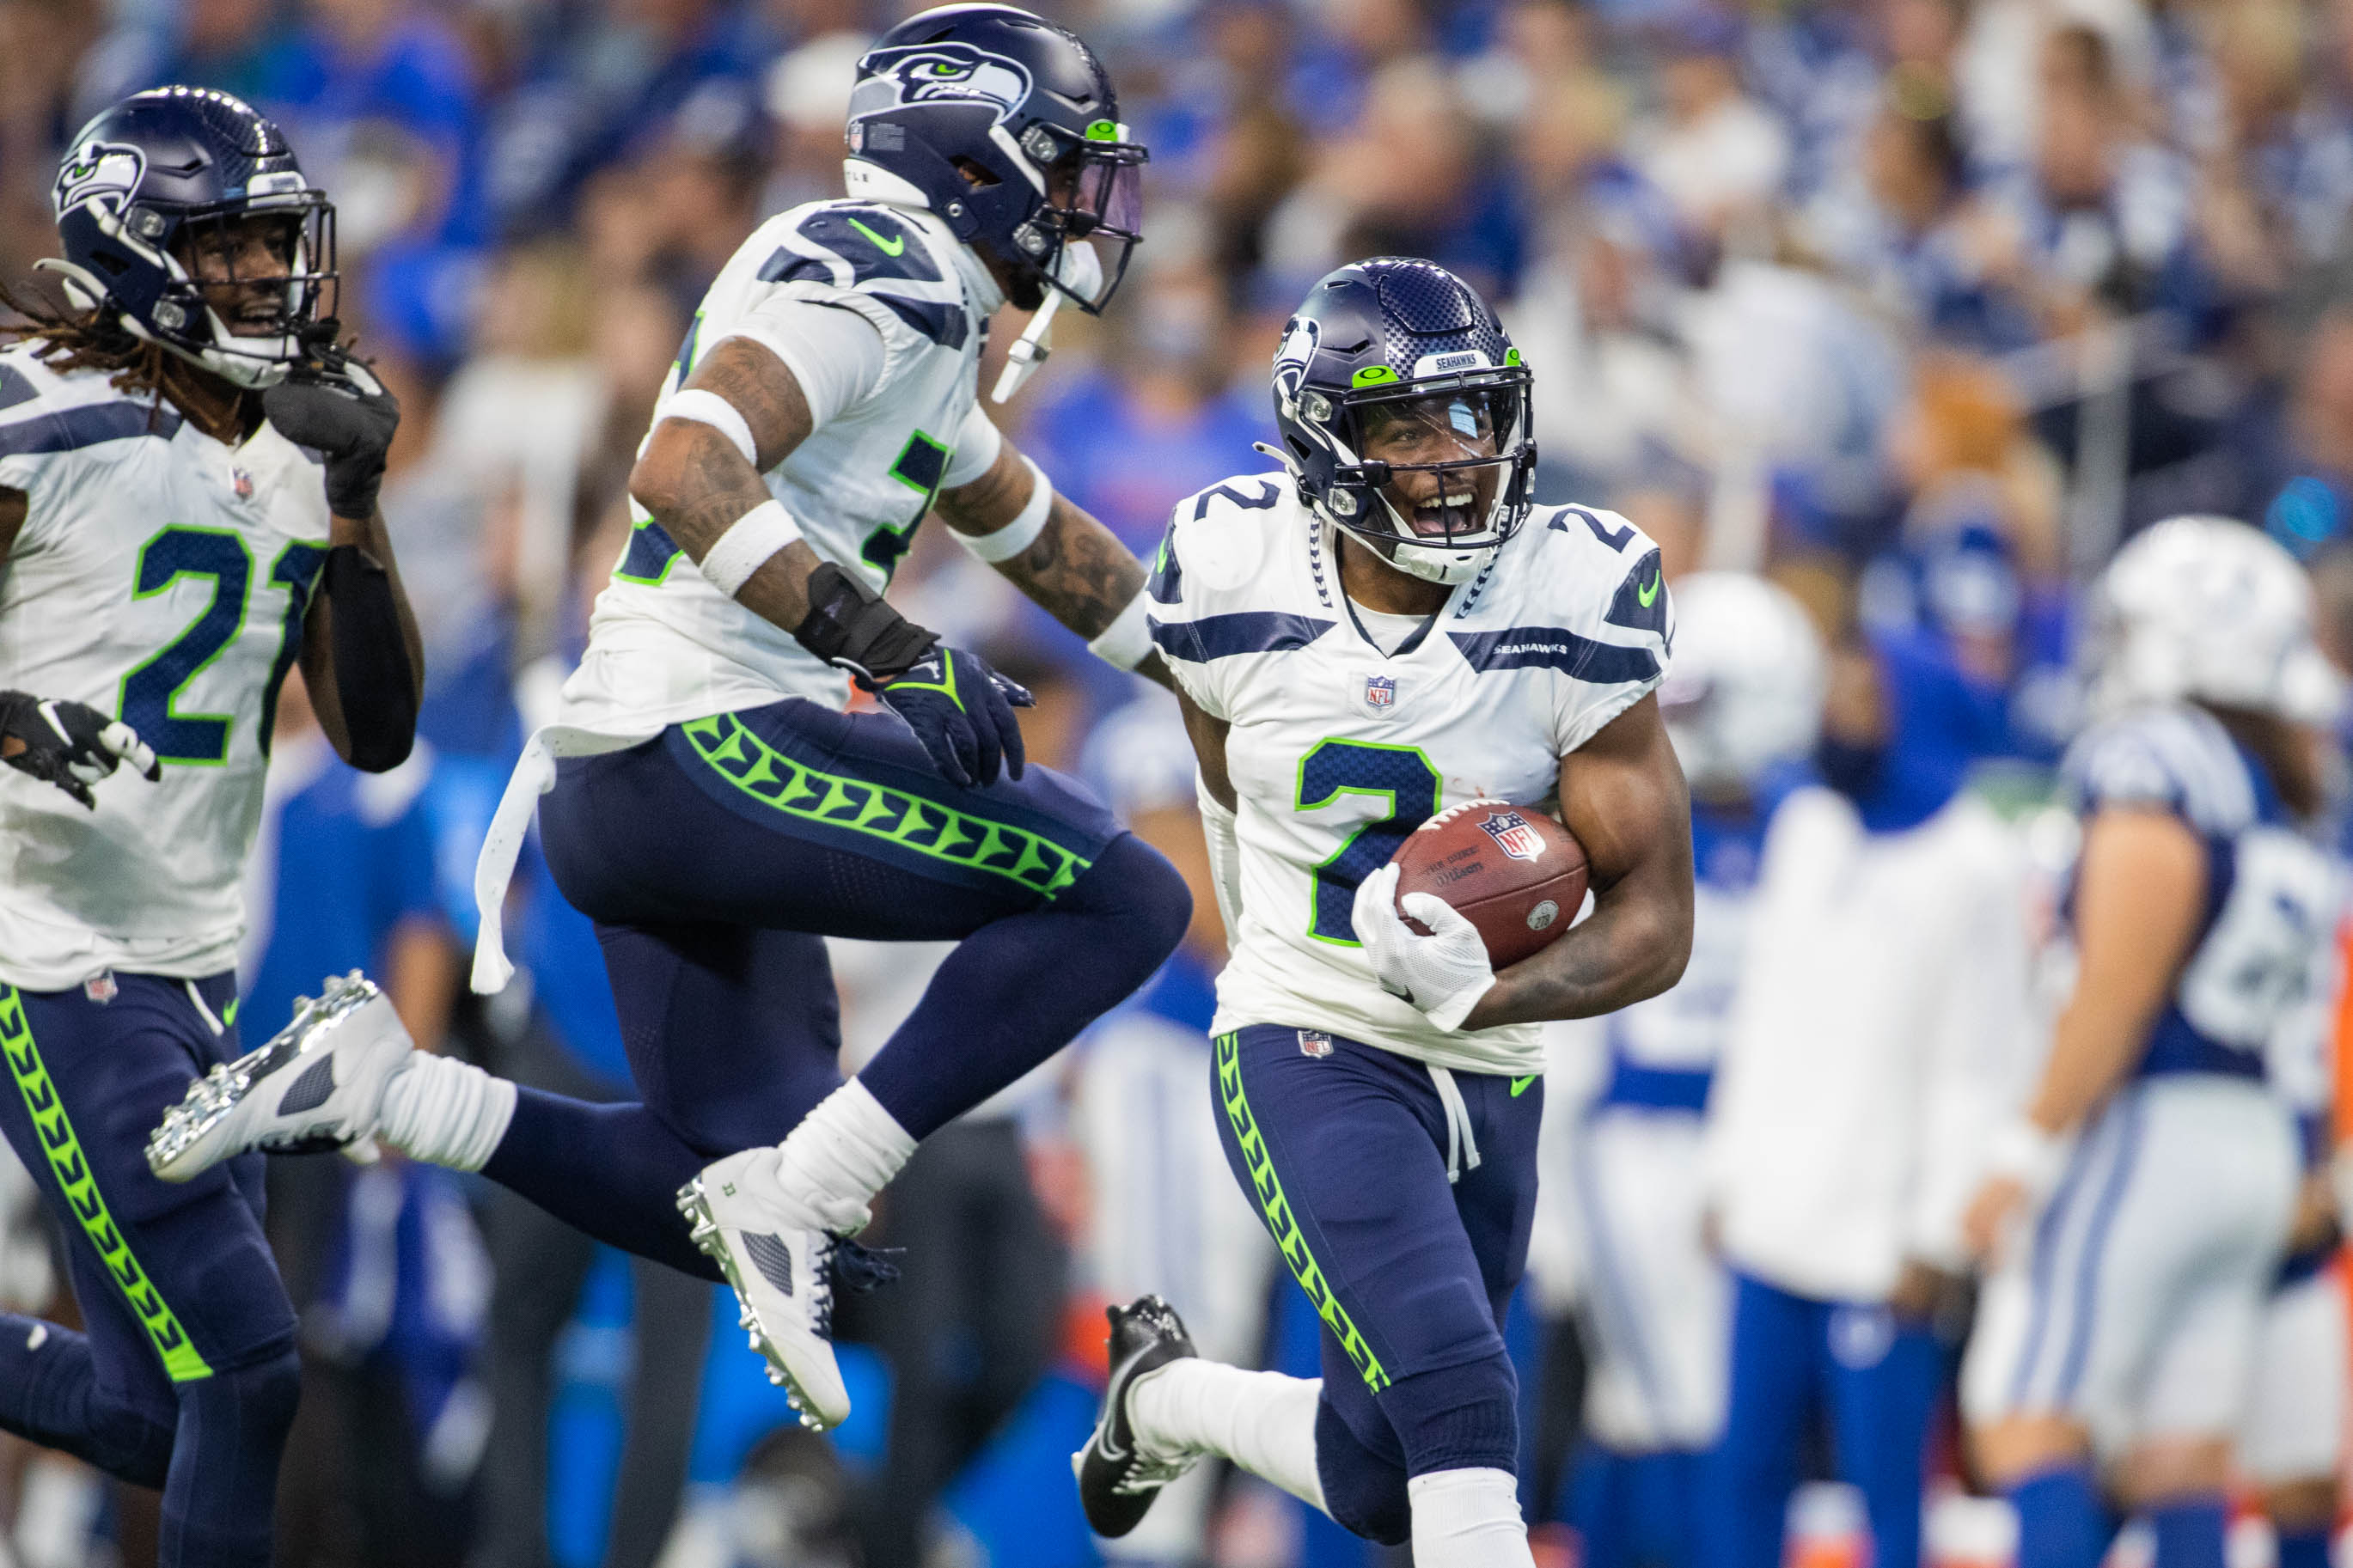 NFL: Seattle Seahawks at Indianapolis Colts